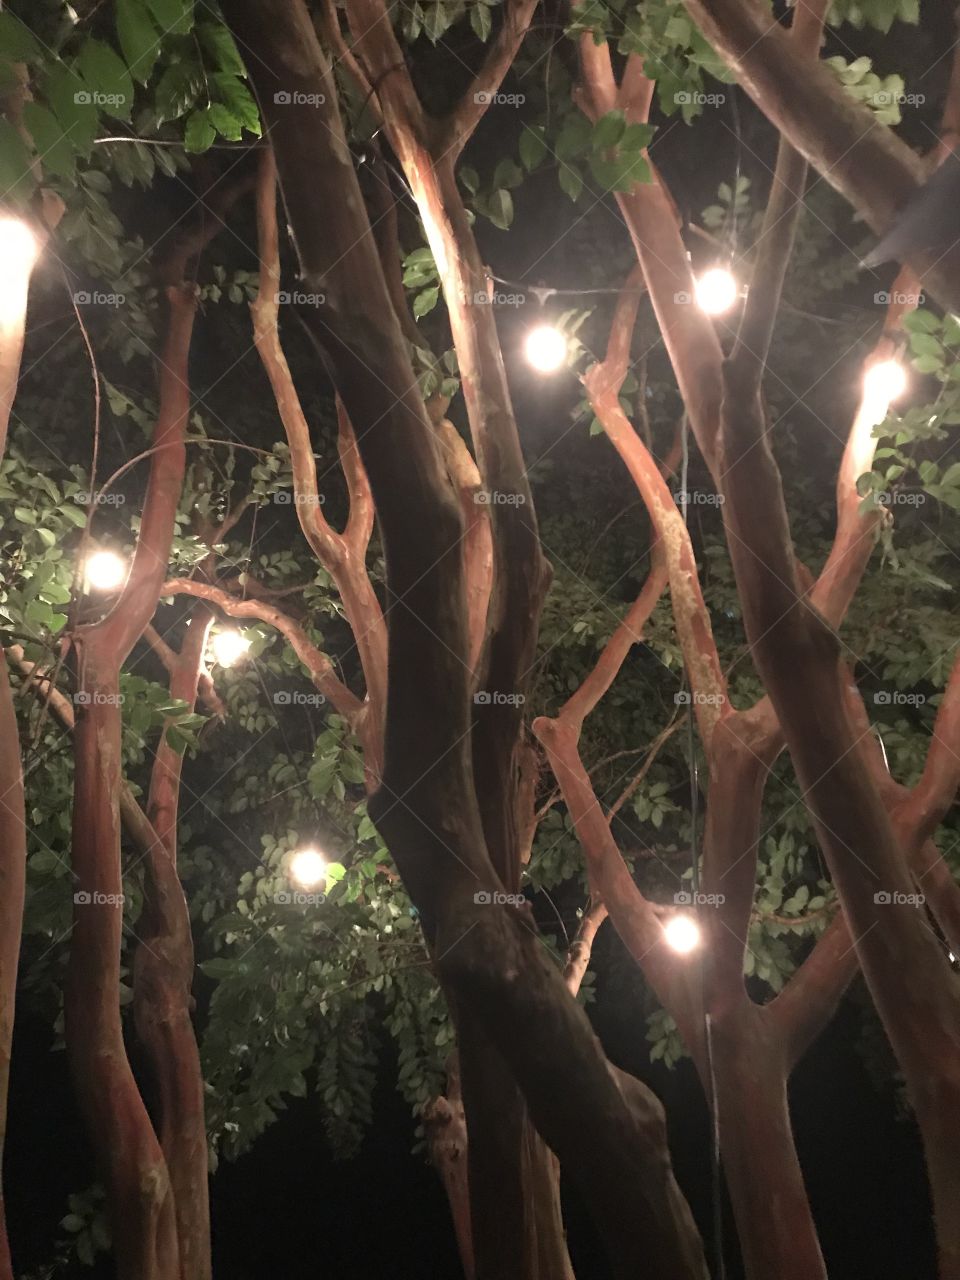 outdoor patio lights hanging in a tree at night